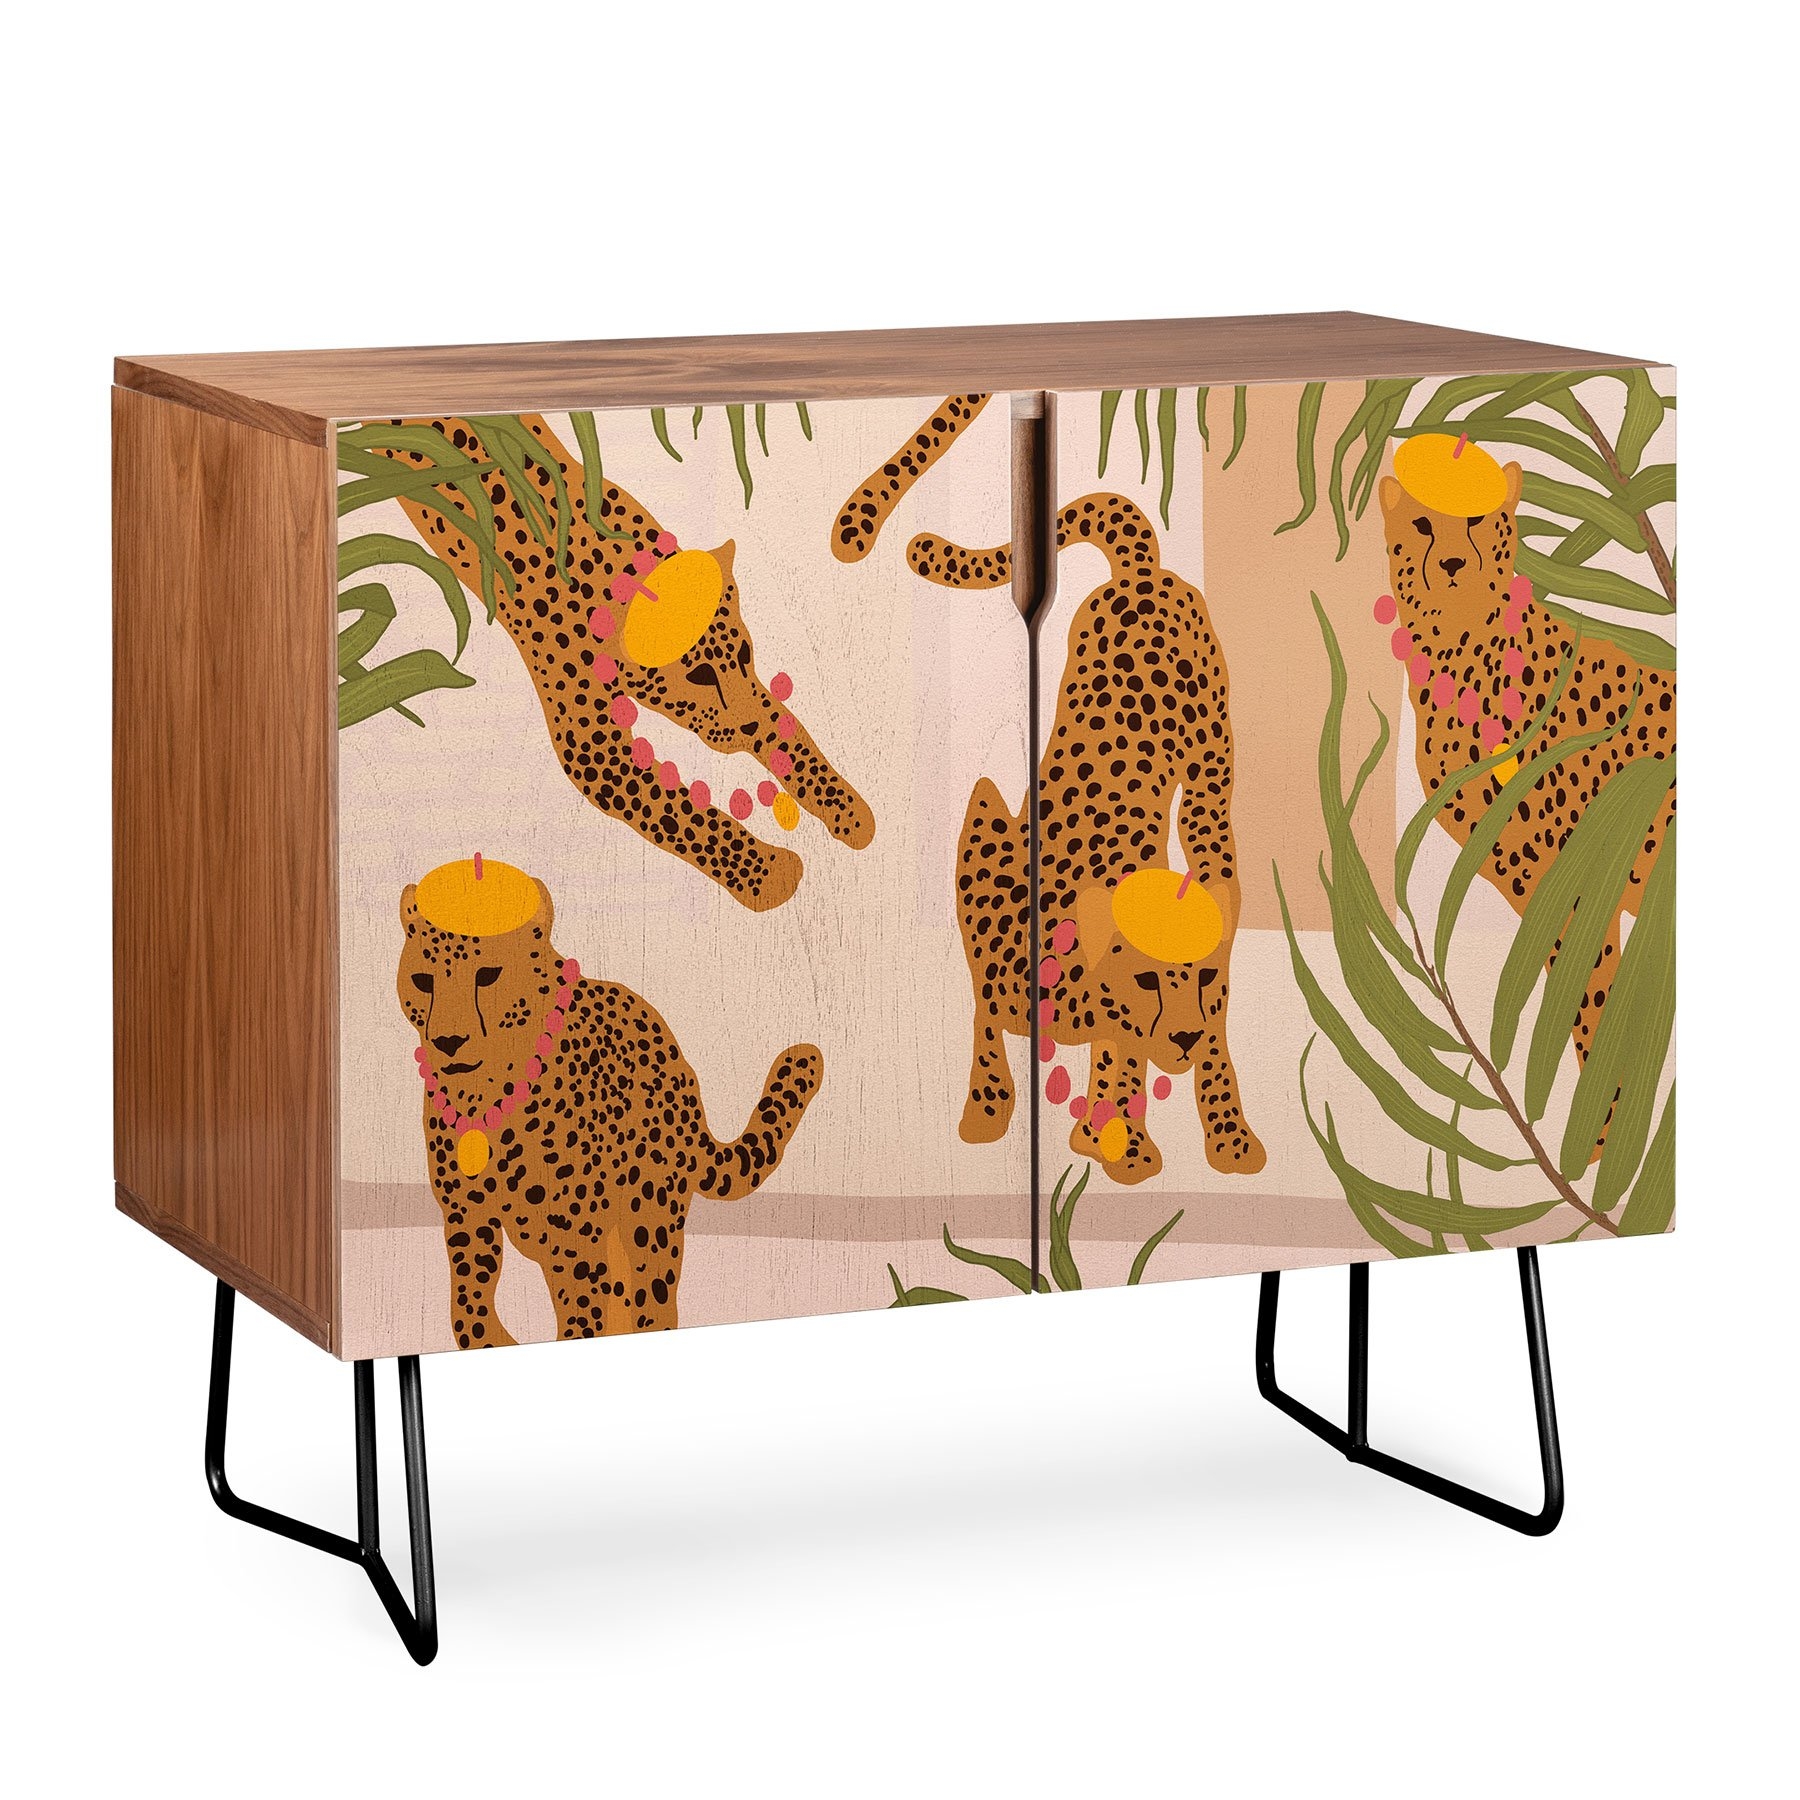 Iveta Abolina Come Play with Me Credenza - Walnut / Gold - Image 2